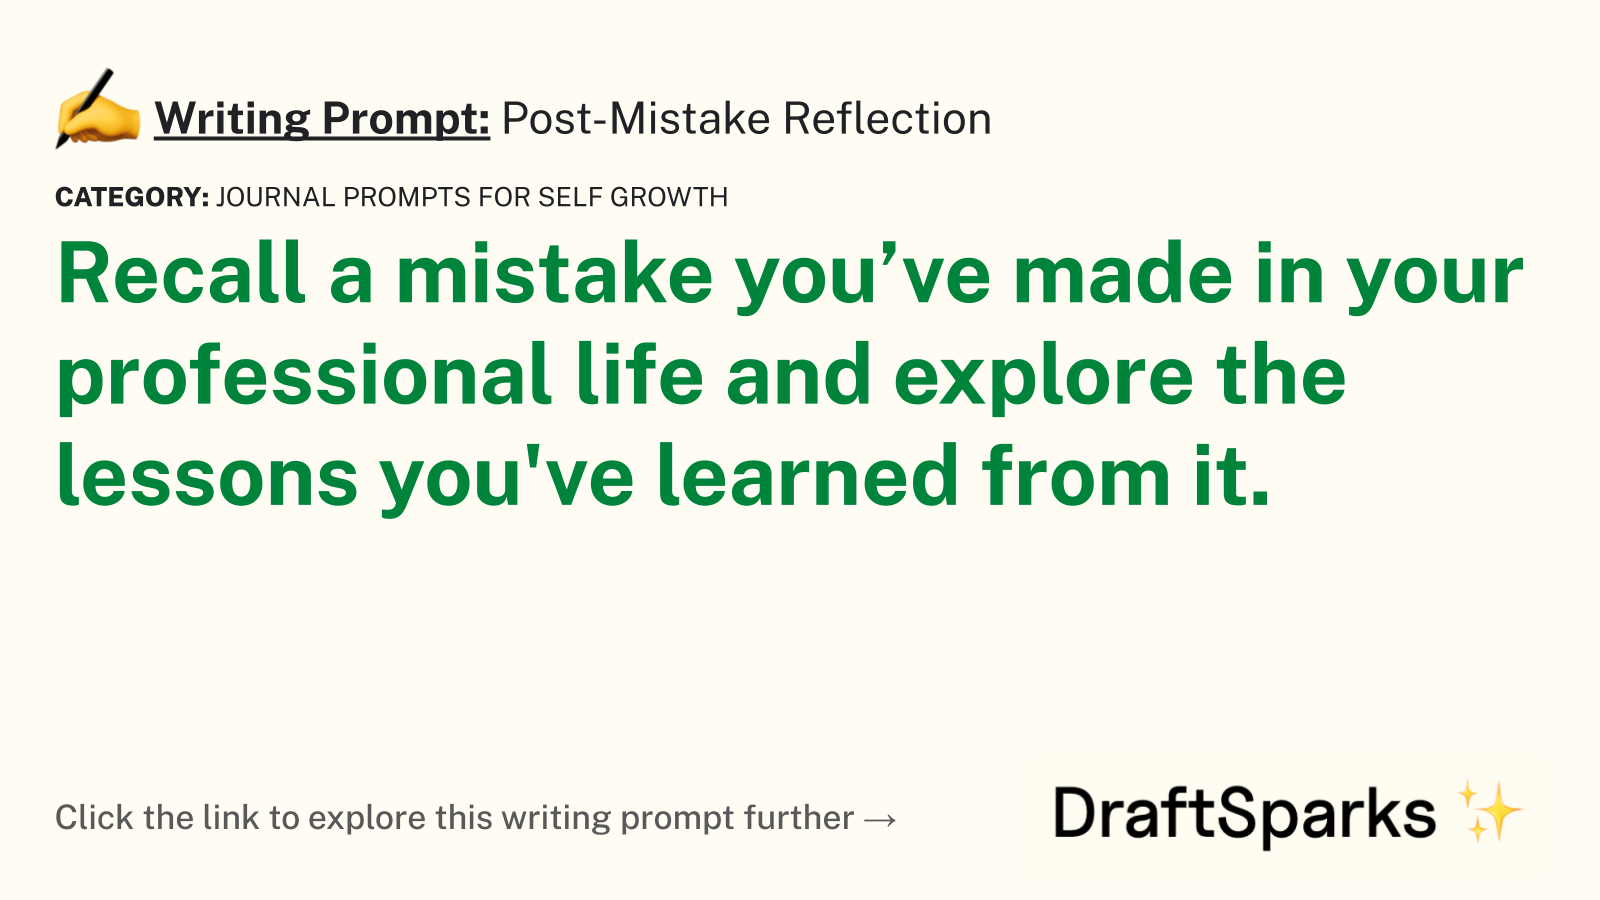 Post-Mistake Reflection